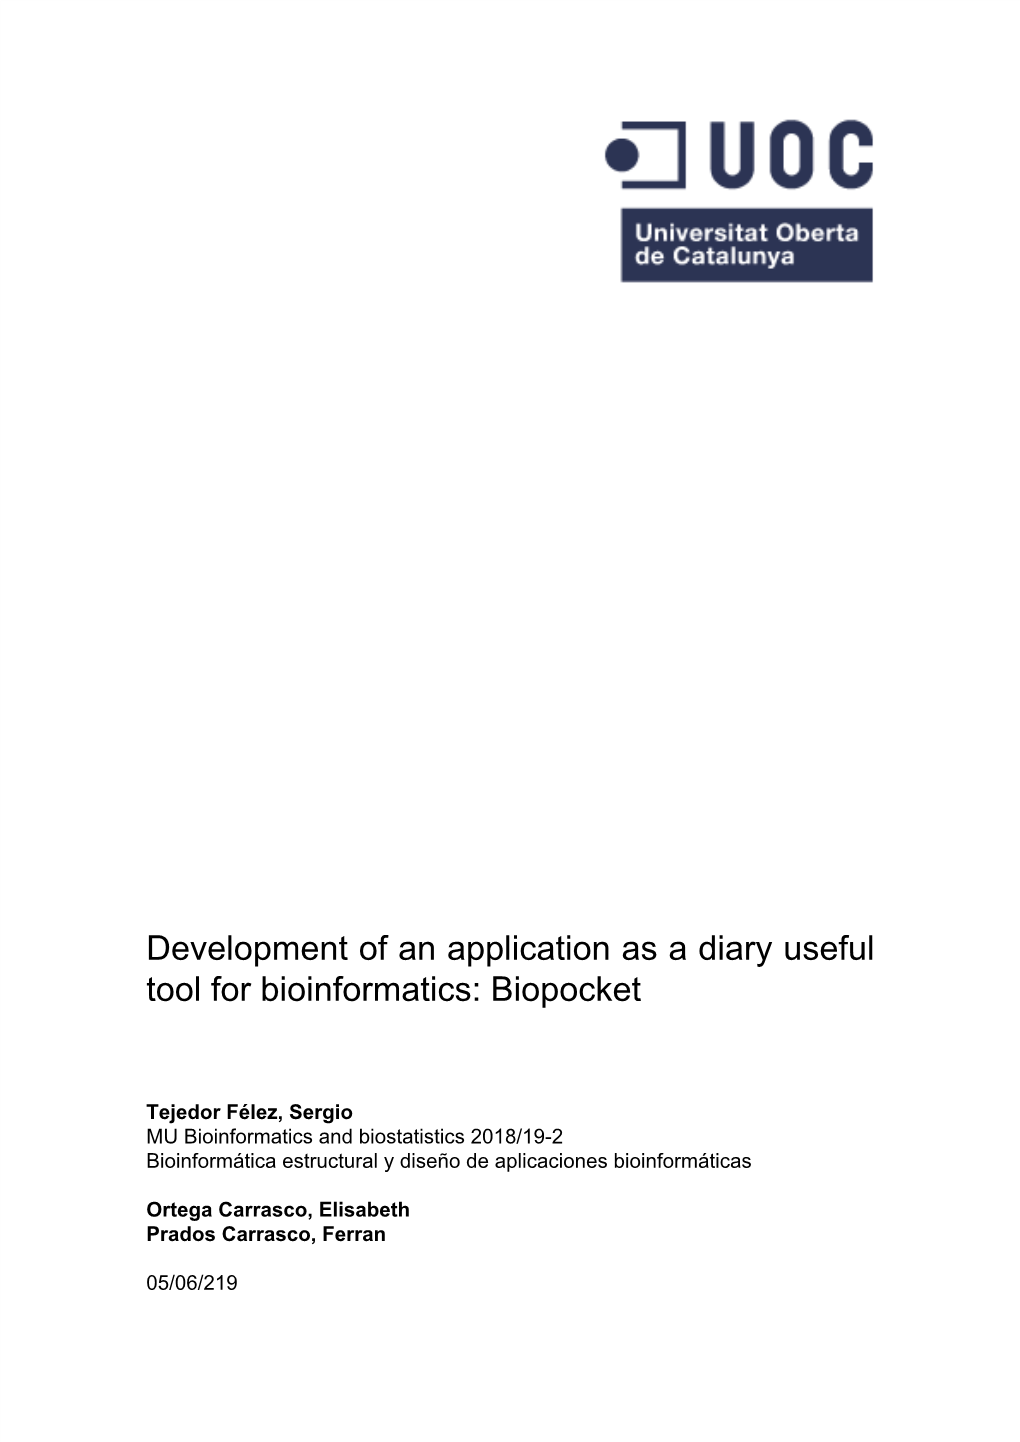 Development of an Application As a Diary Useful Tool for Bioinformatics: Biopocket